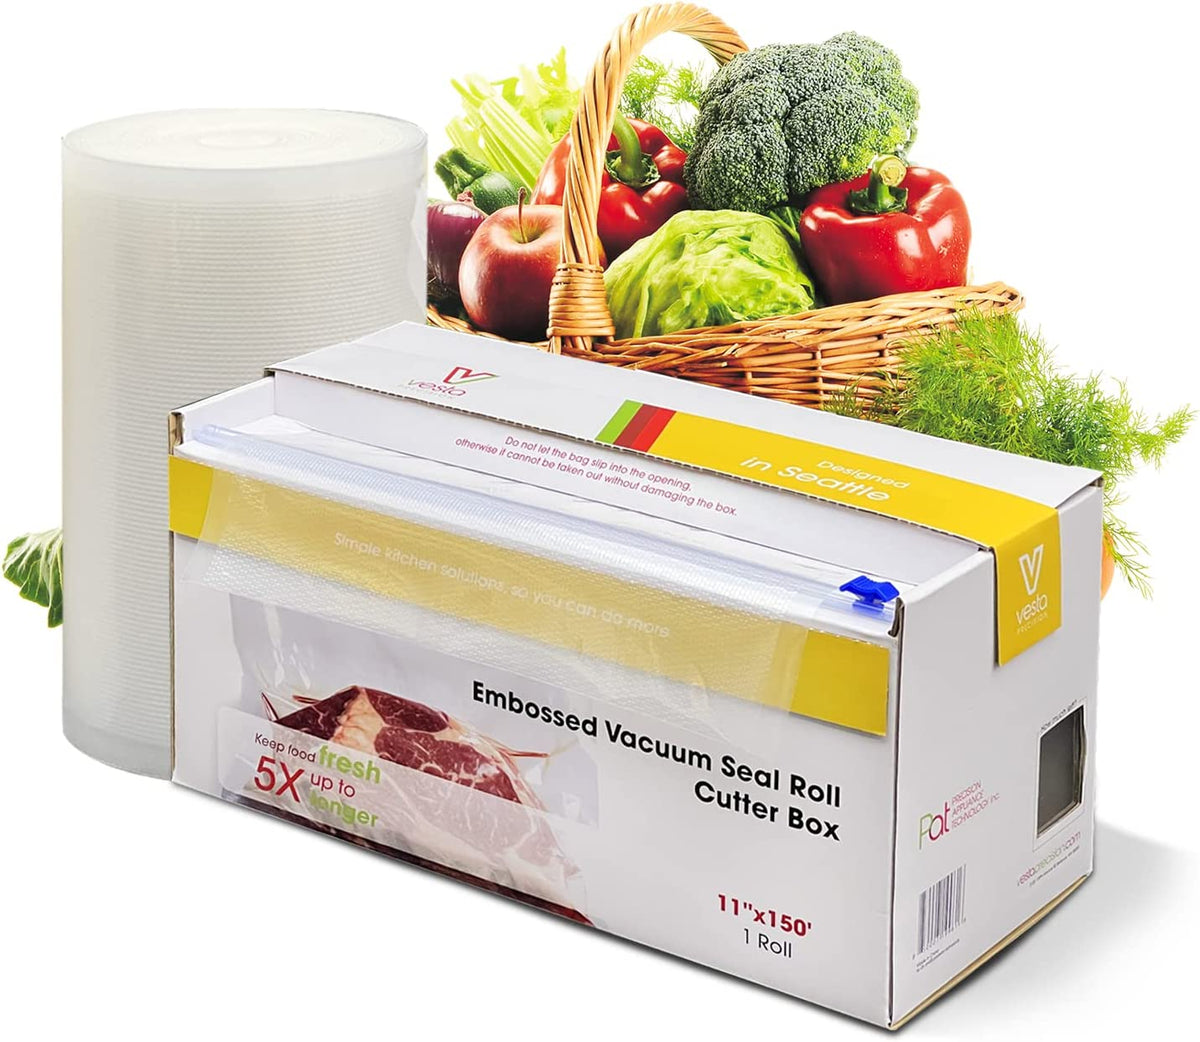 11'' x 150' Vacuum Sealer Roll Keeper with Cutter, Vacuum Sealer Bags for  Food, Food Saver Bags Rolls, BPA Free, Commercial Grade, Great for Storage